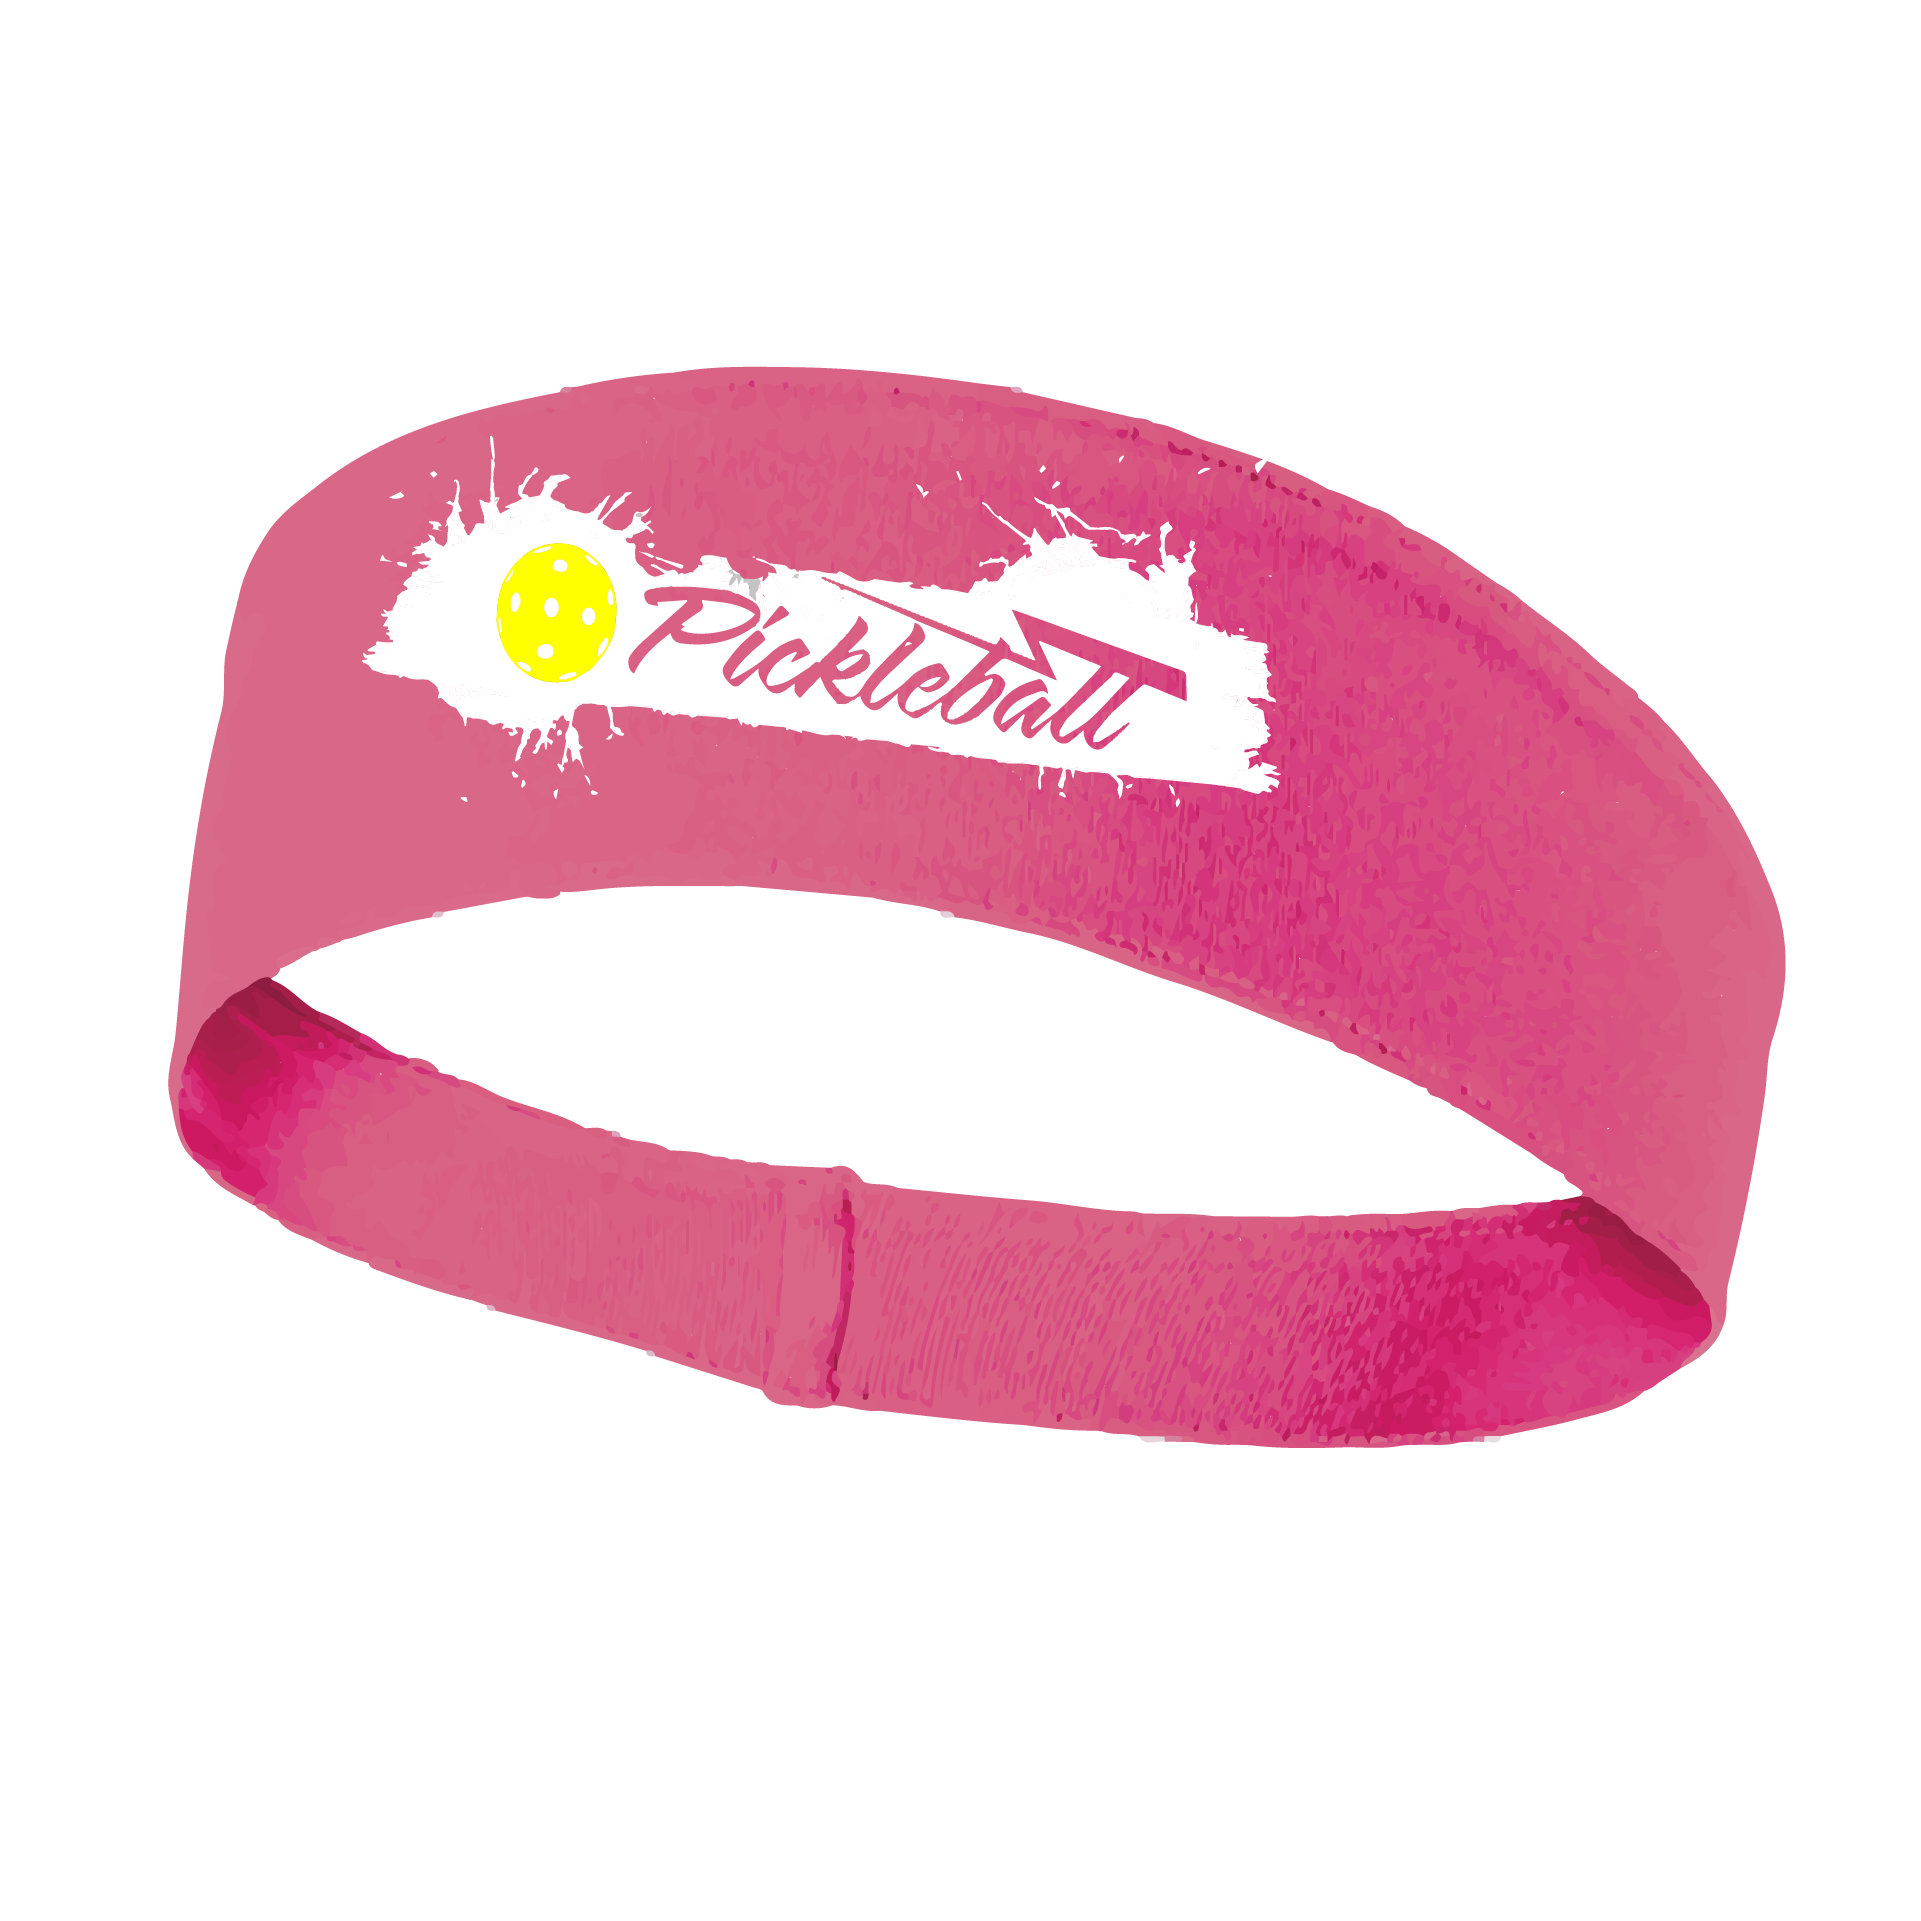 Pickleball Design: Extreme Pickleball  This fun, pickleball designed, moisture-wicking headband narrows in the back to fit more securely. Single-needle top-stitched edging. These headbands come in a variety of colors. Truly shows your love for the sport of pickleball!!